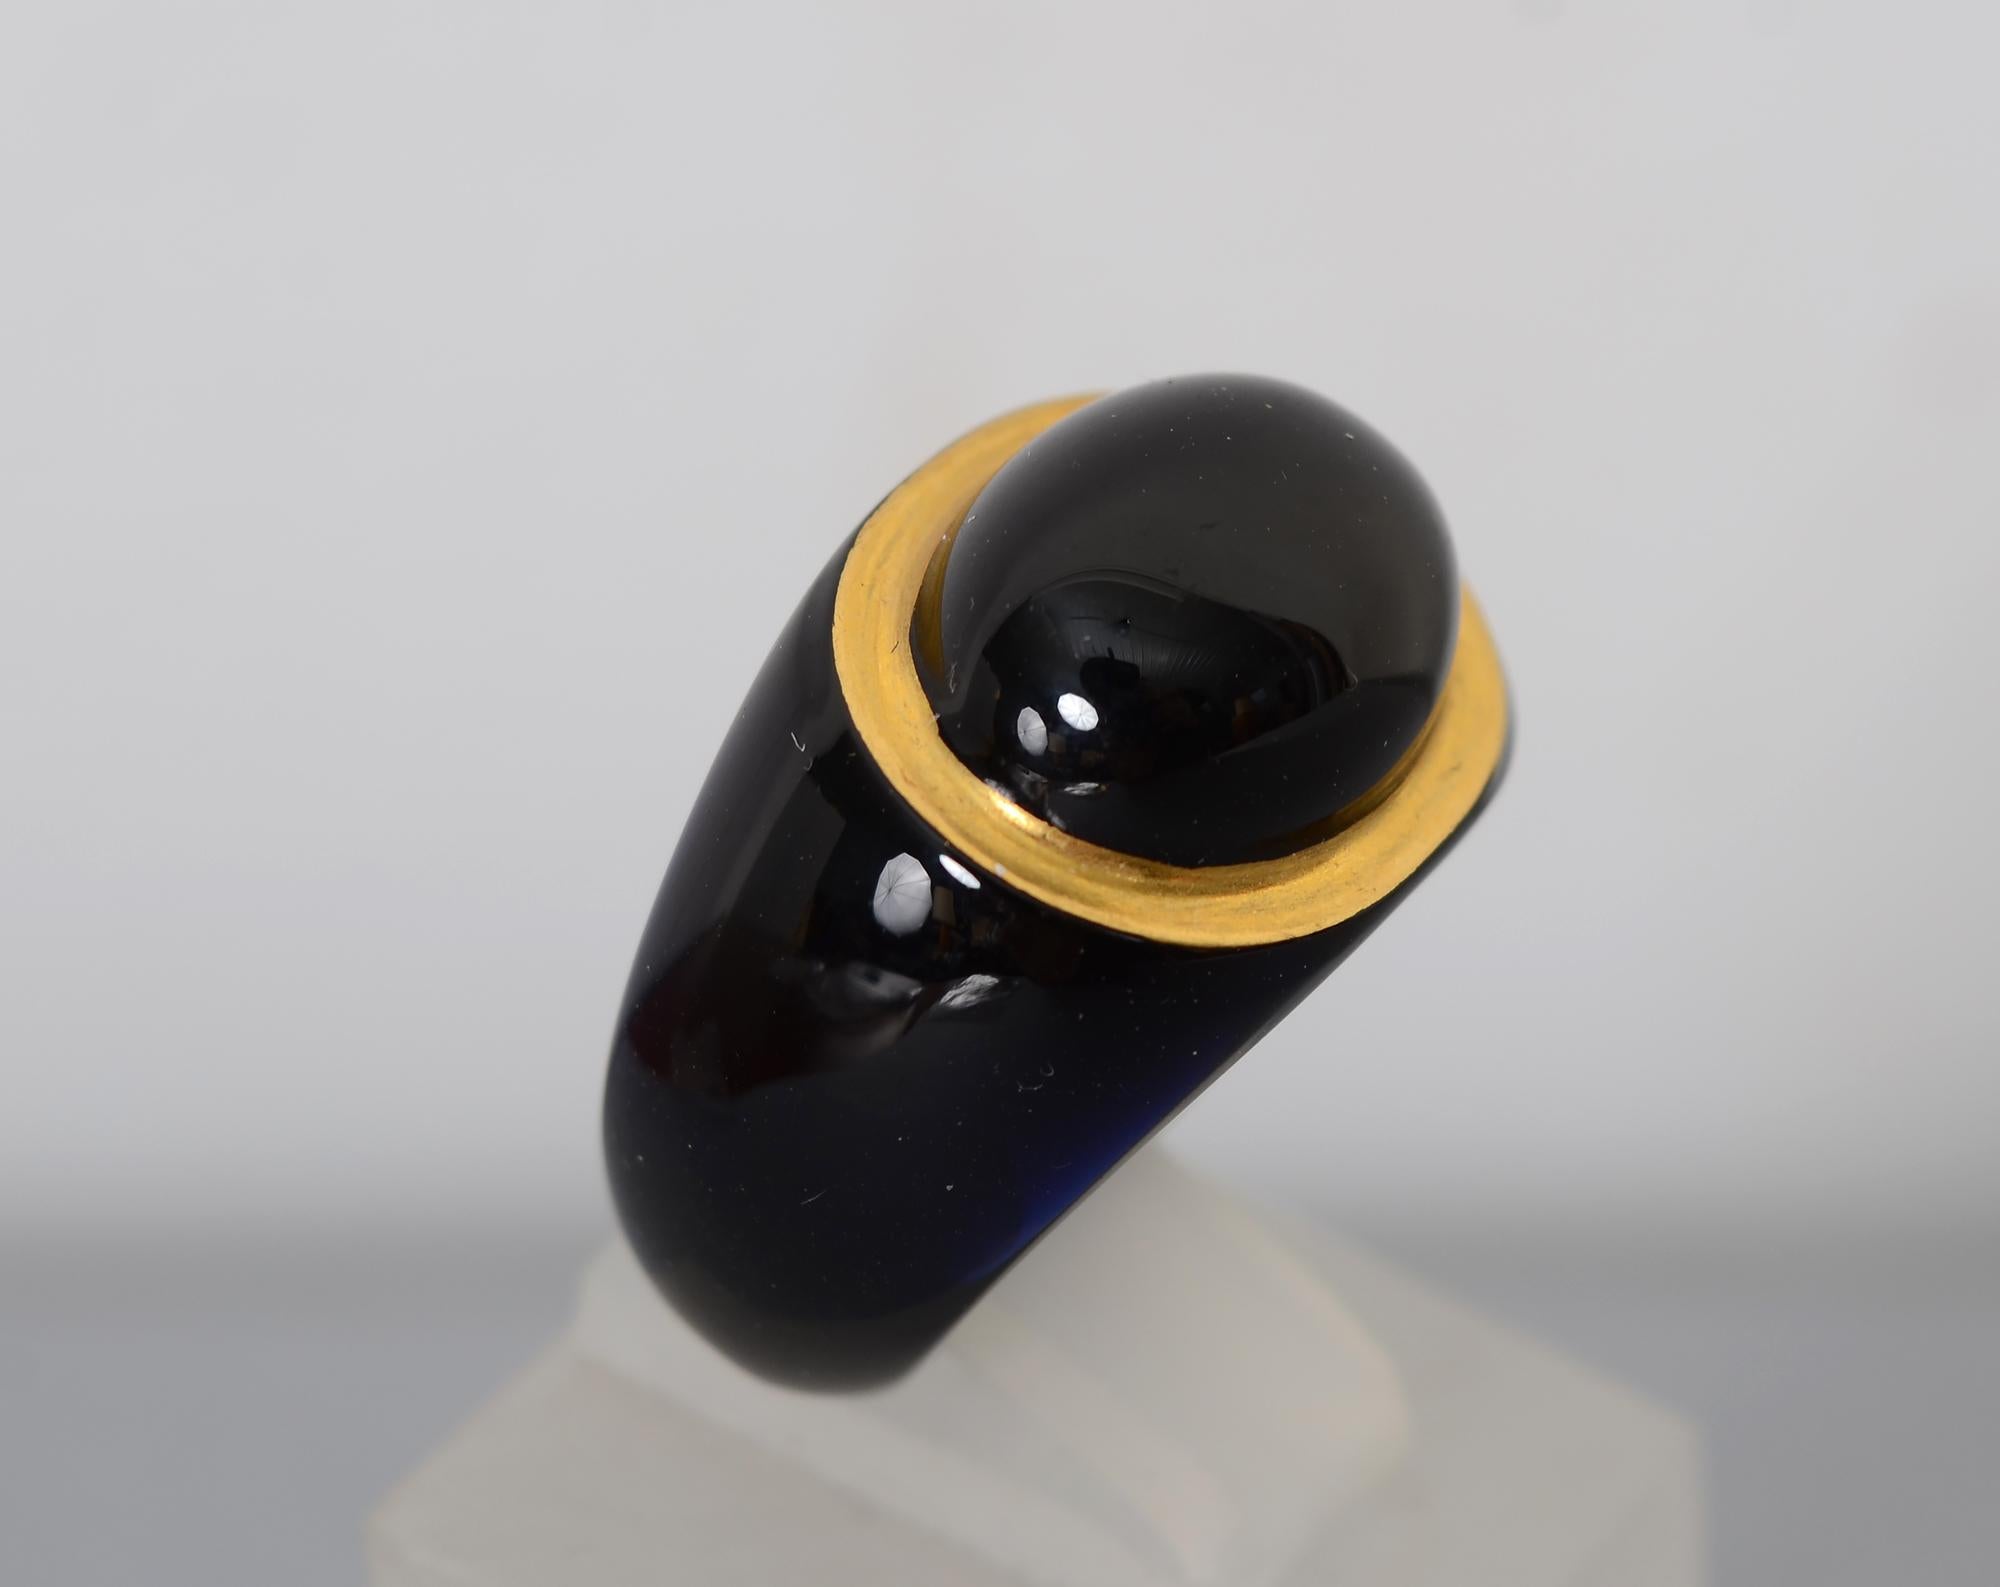 An oval black onyx stone is set in a 14 karat gold bezel in this stylish black ring. The ring is a composite material. It is size 6 1/2 and cannot be changed. The ring measures 5/8